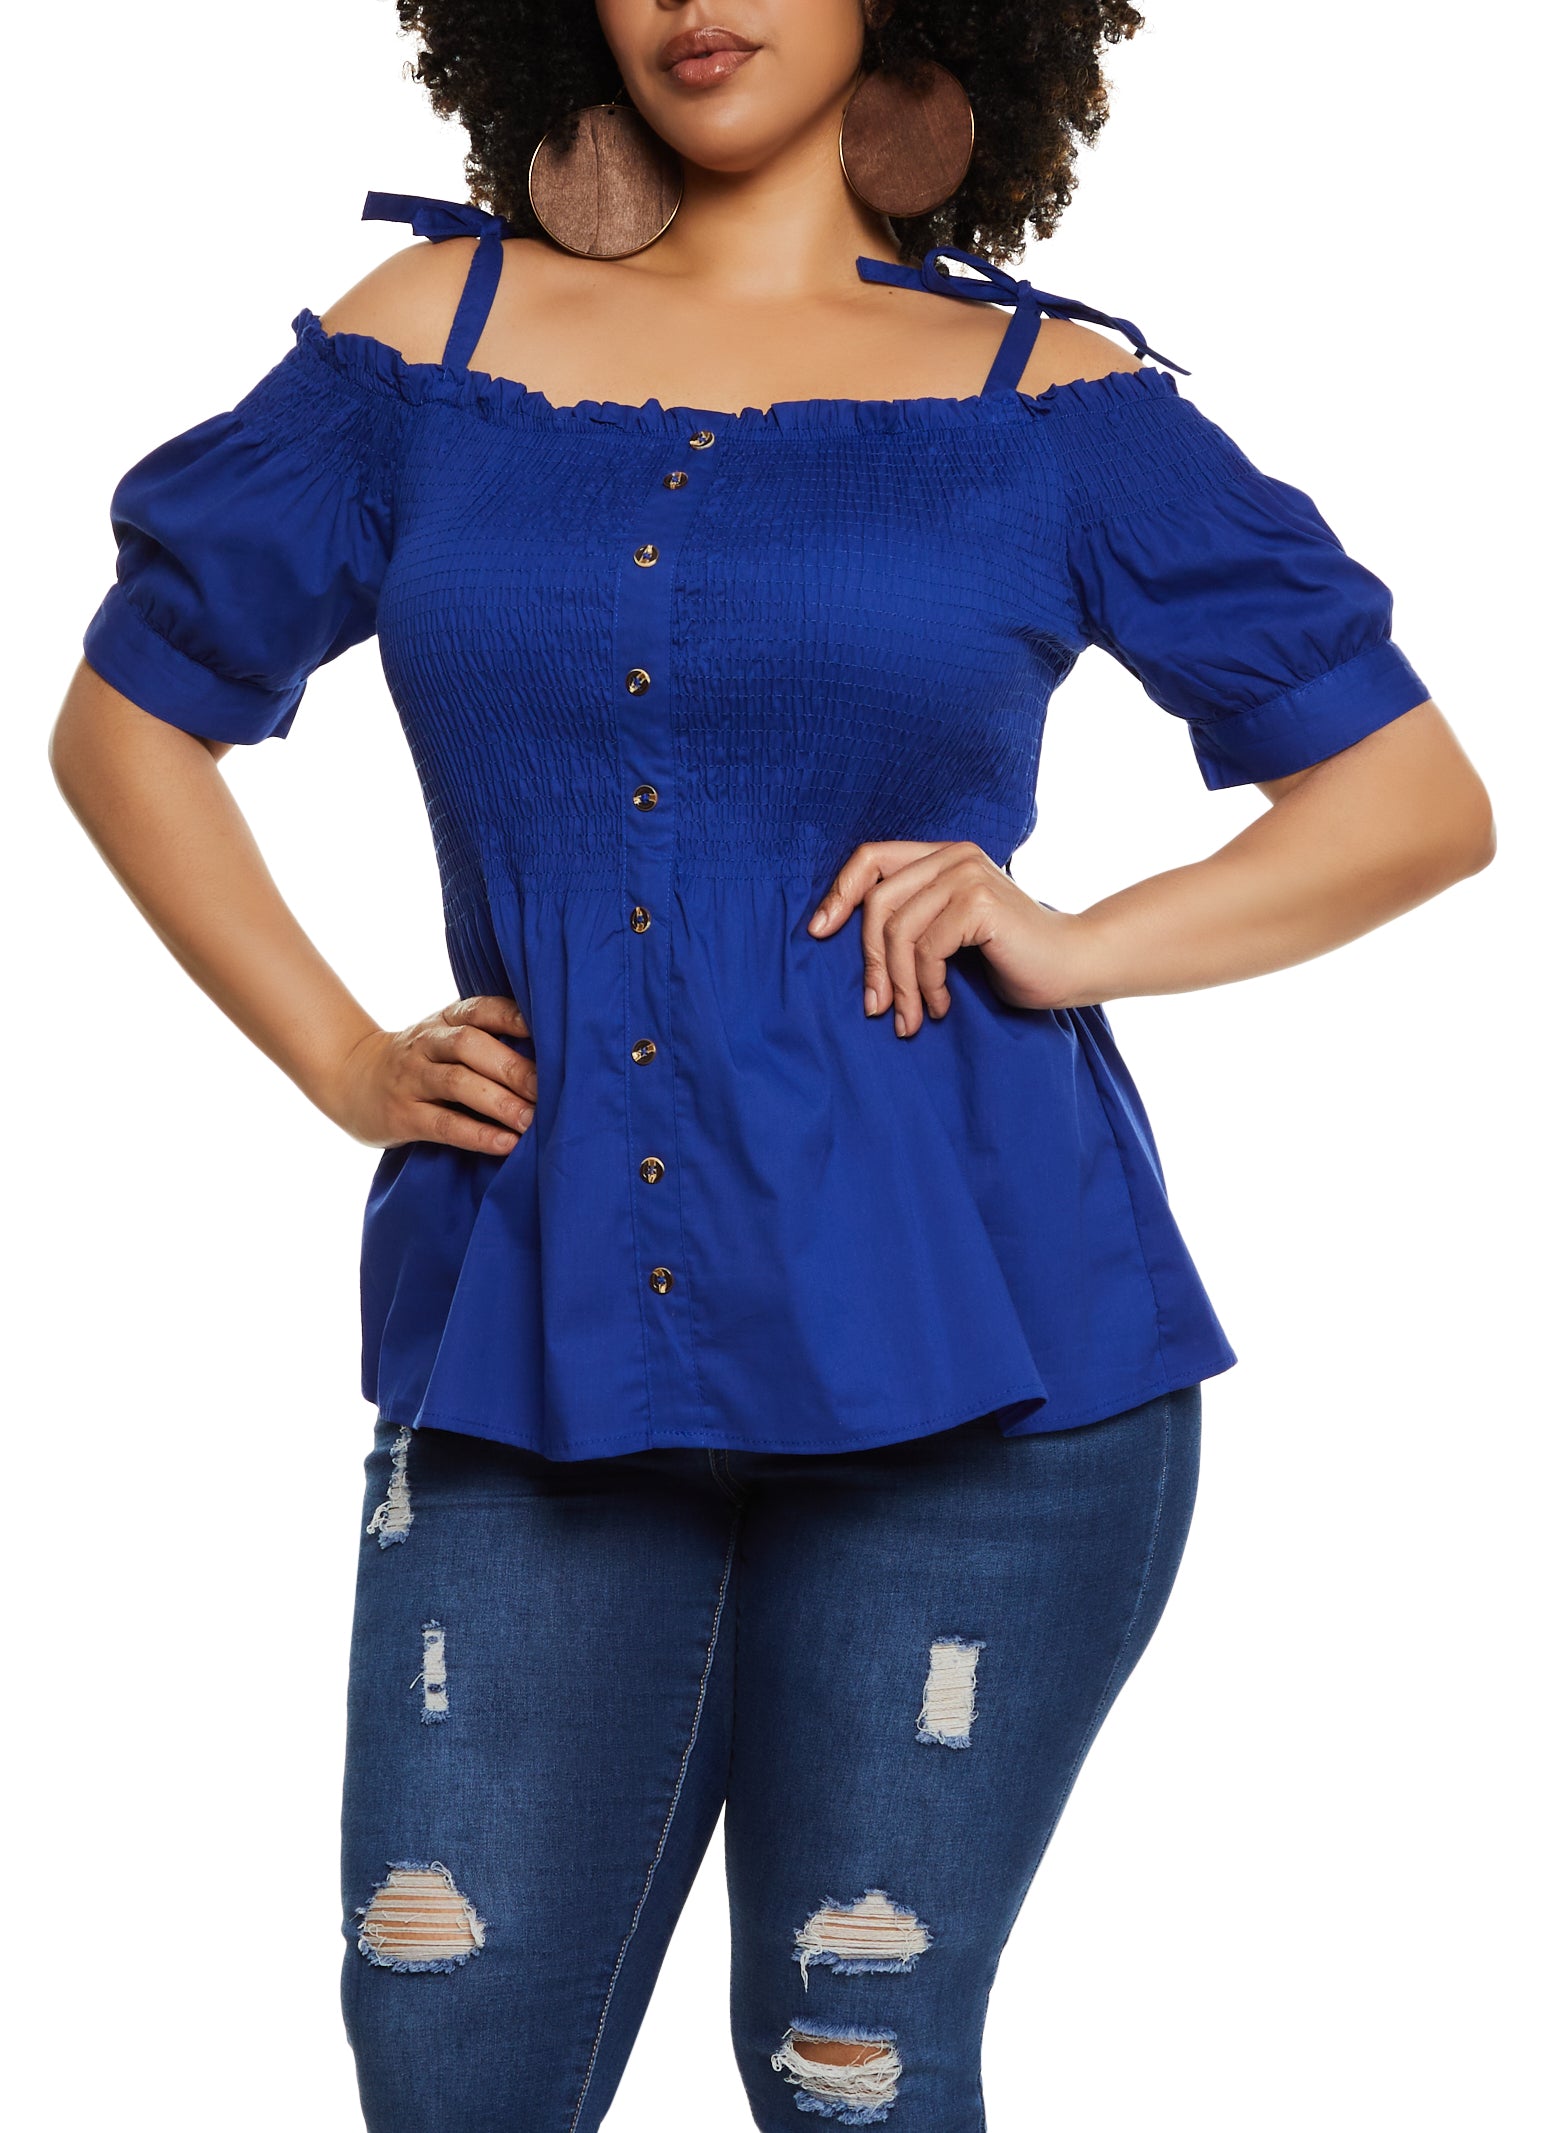 Womens Plus Size Tie Strap Smocked Cold Shoulder Top, Blue, Size 3X